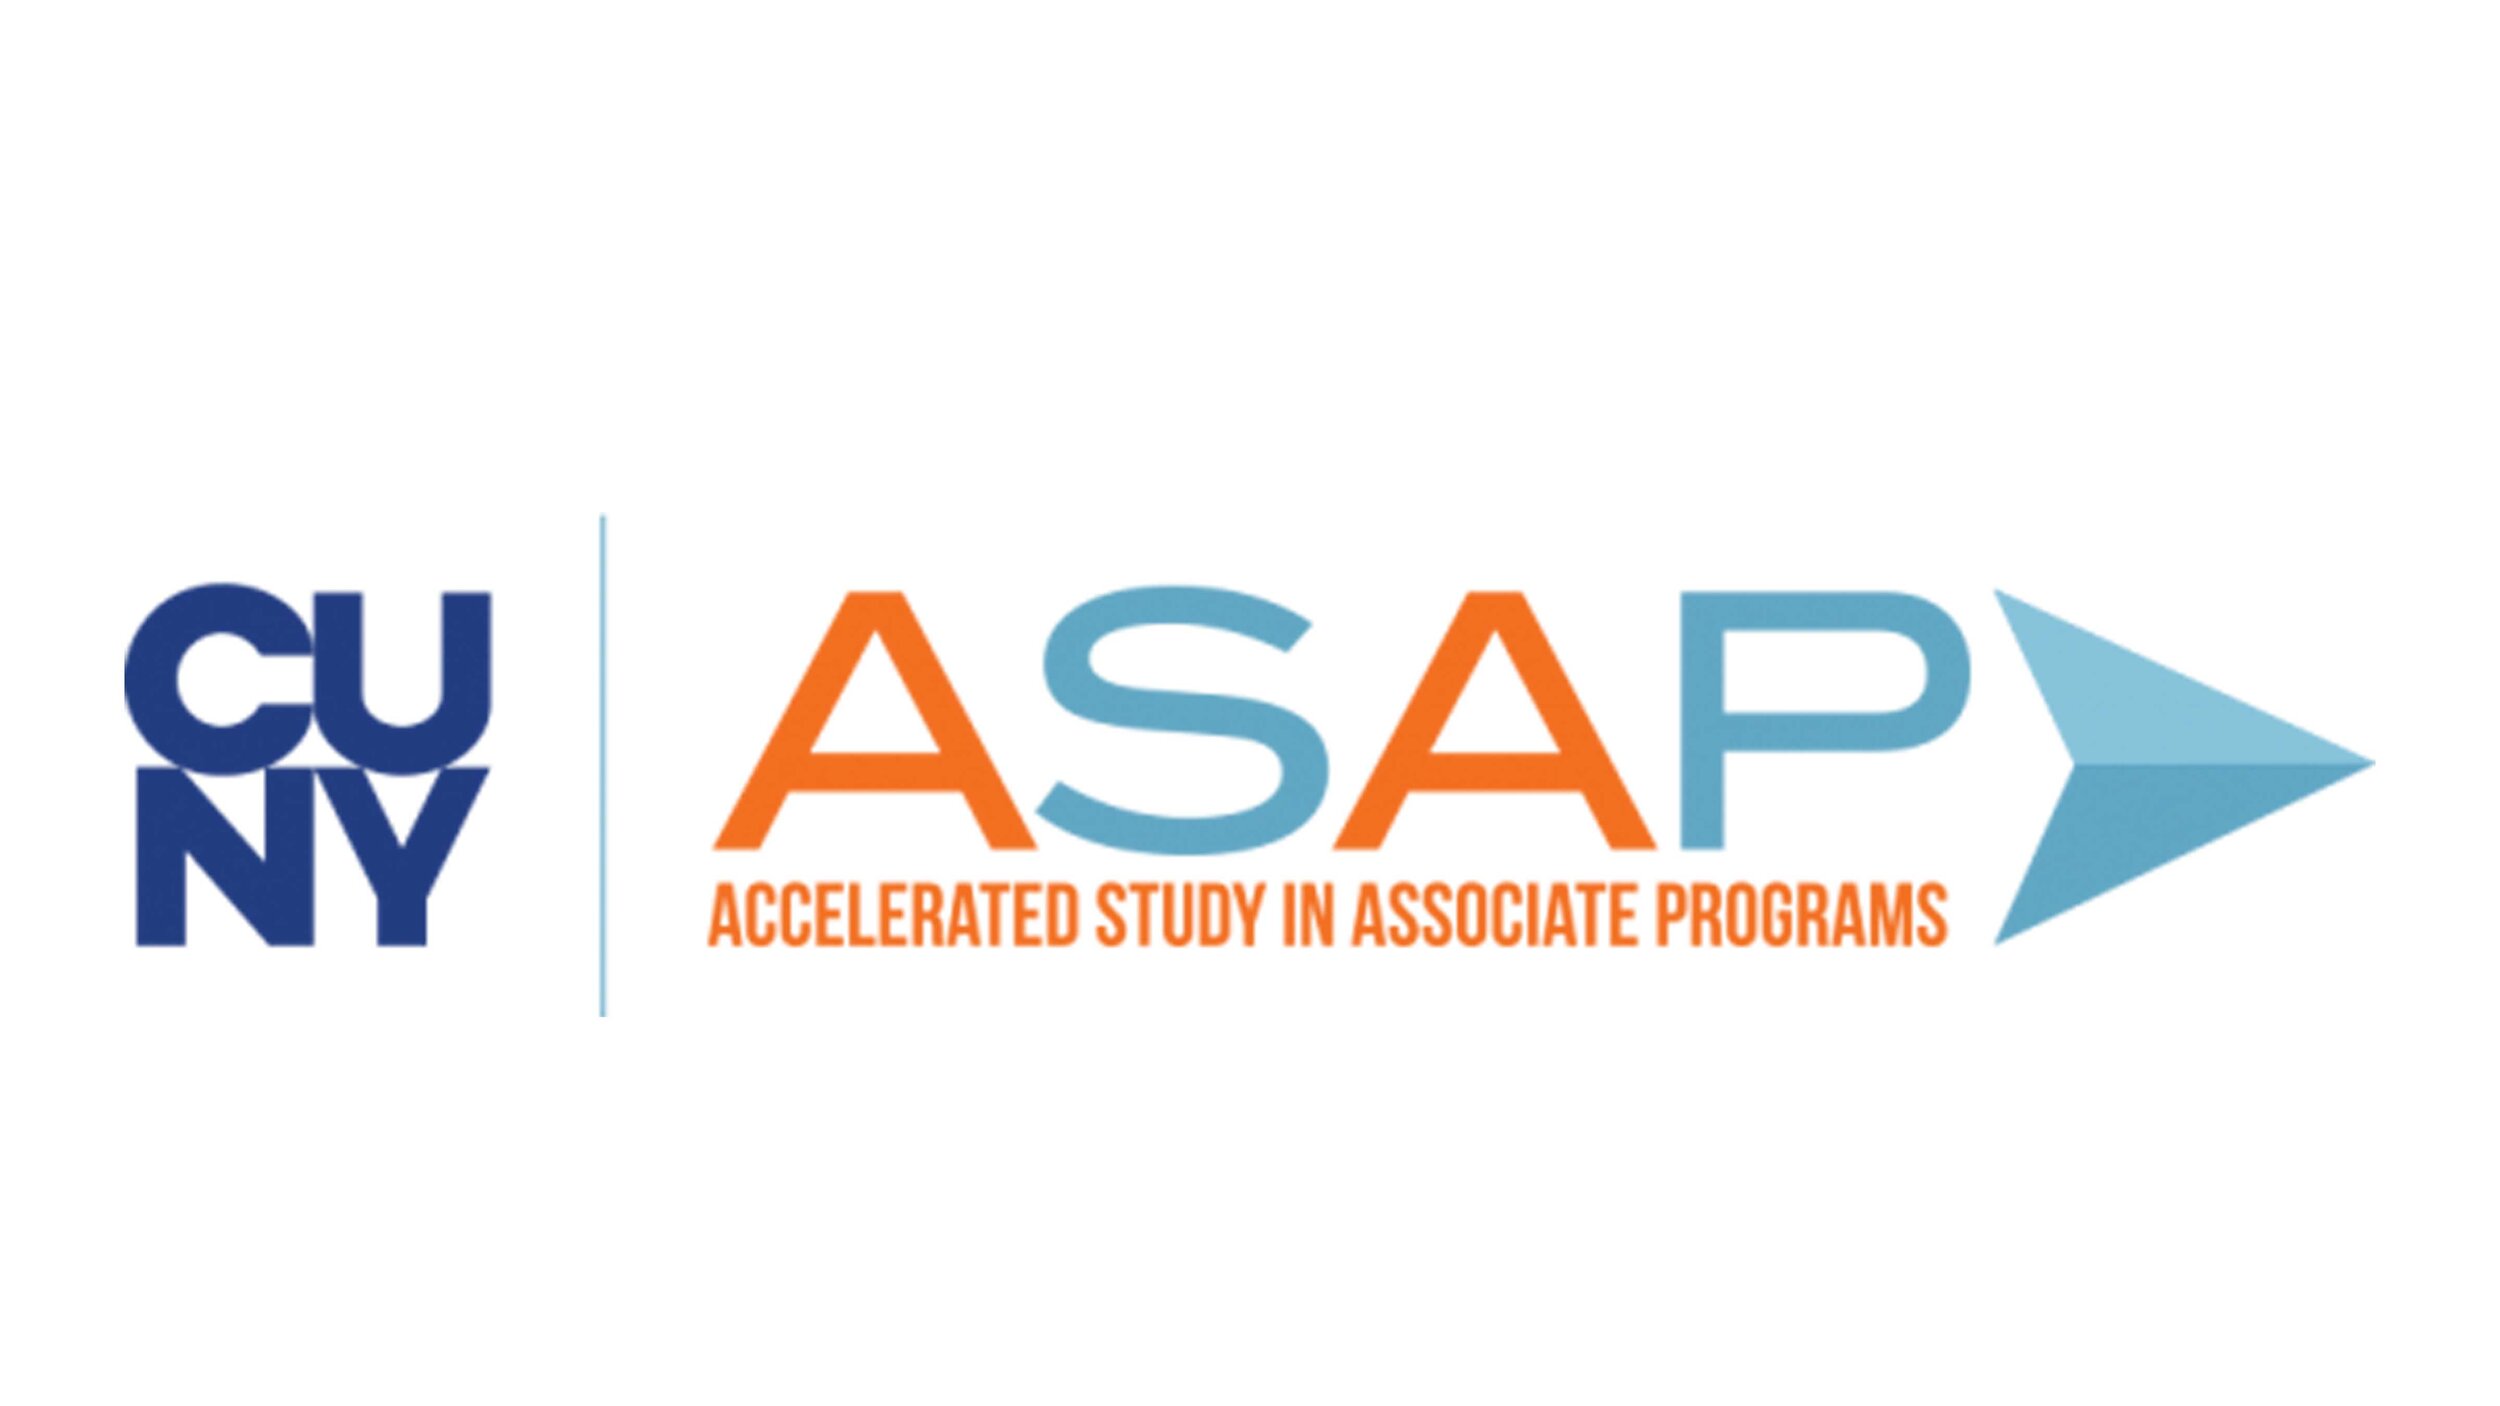 CUNY's ASAP (Accelerated Study in Associate Programs) logo